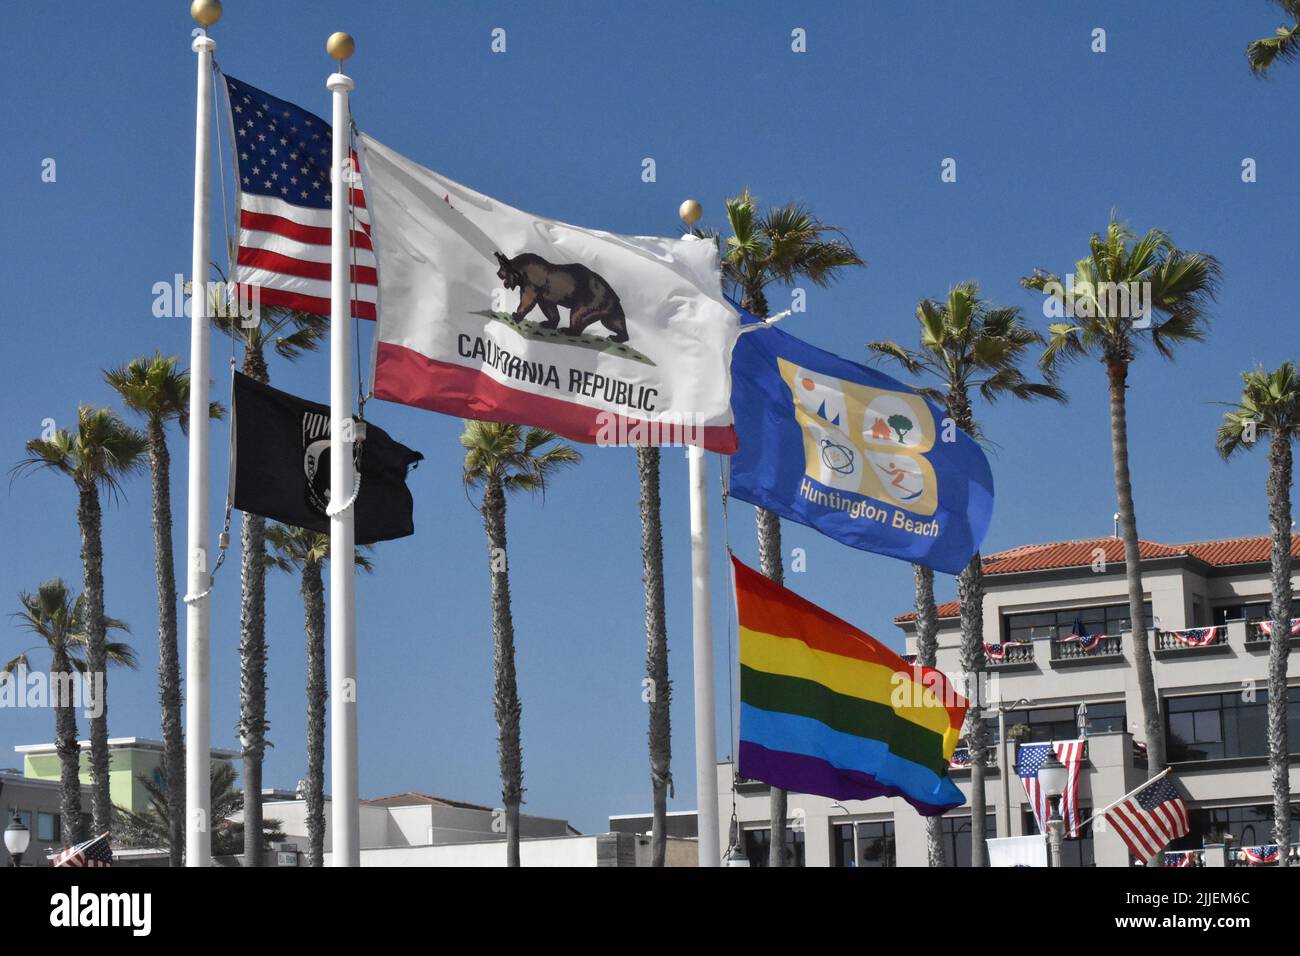 Several flags flying at Huntington Beach in front of palm trees against a cloudless blue sky, including Stars & Stripes and California Republic flags. Stock Photo